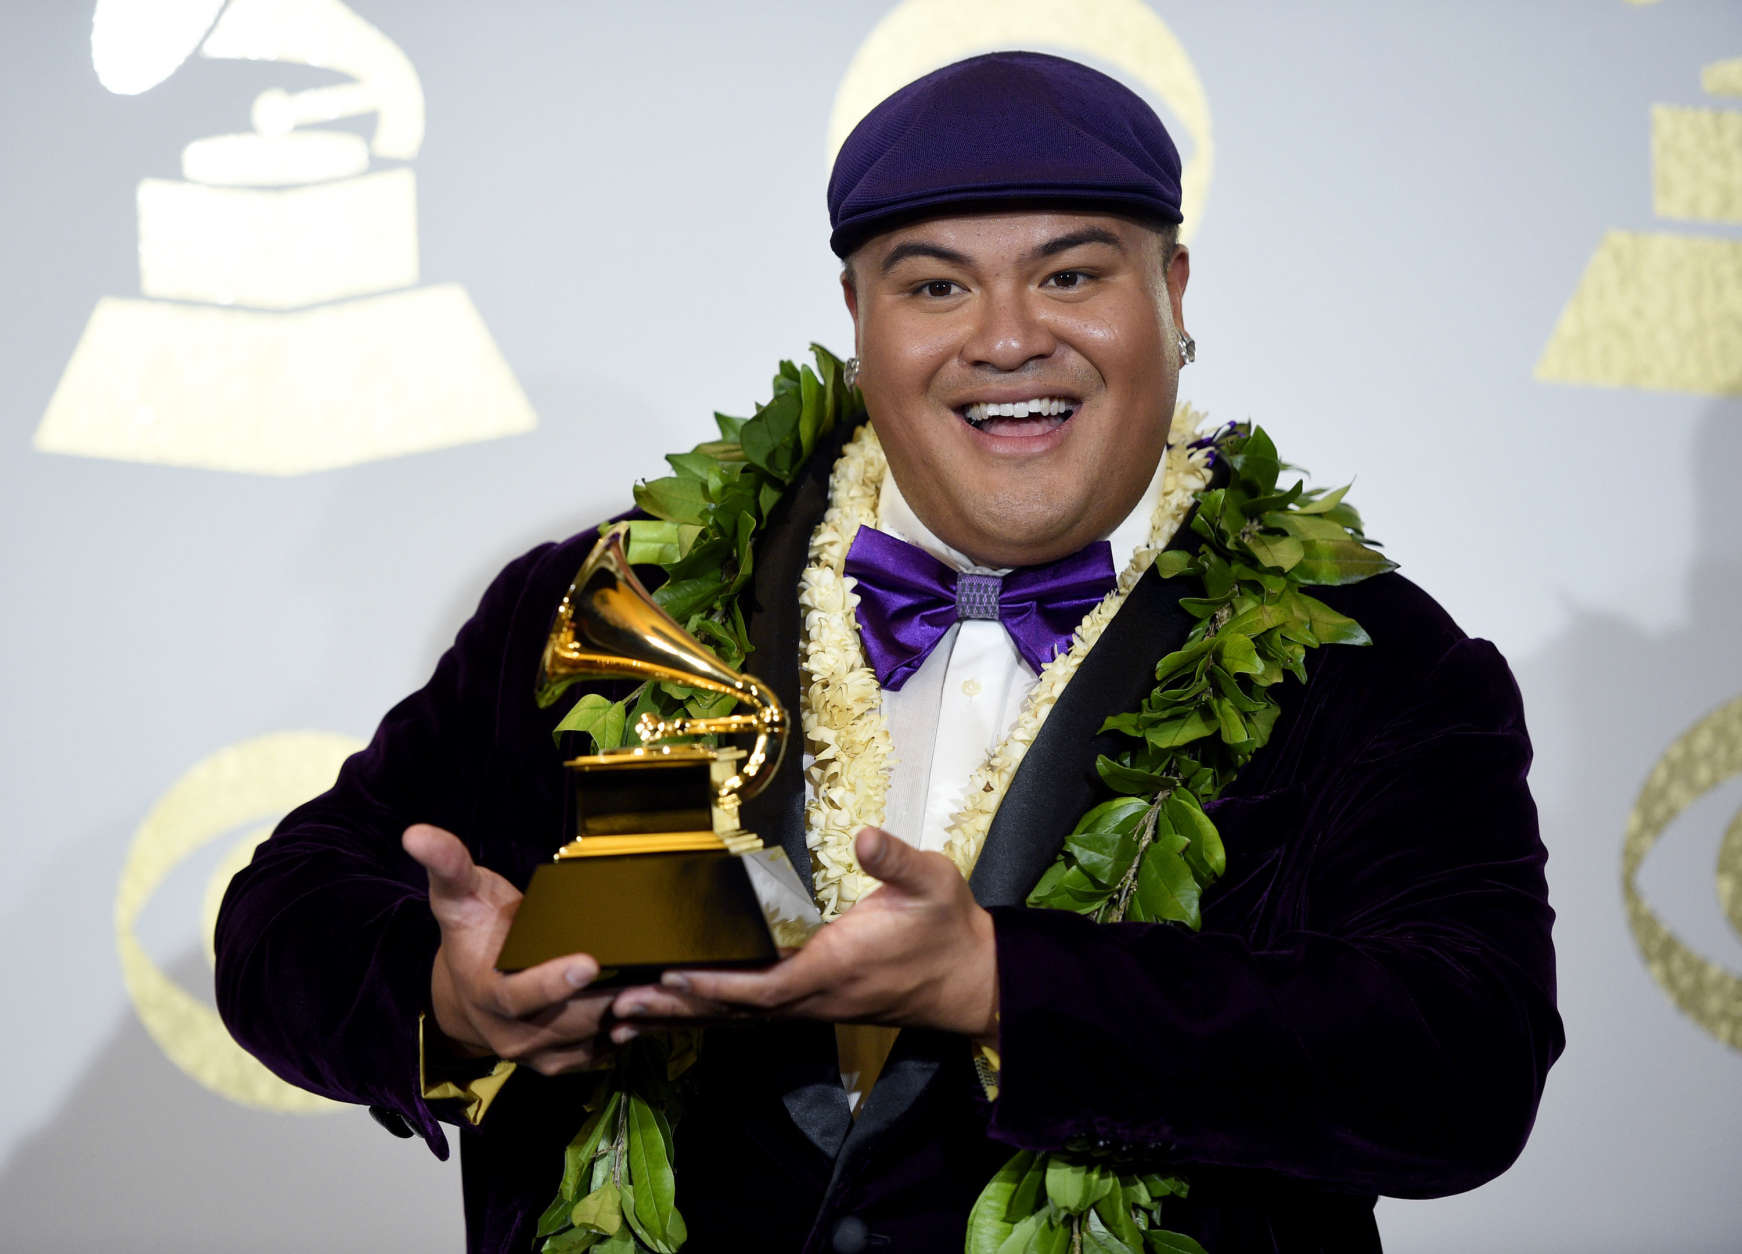 Kalani Pe'a poses in the press room with the award for best regional roots music album for "E Walea" at the 59th annual Grammy Awards at the Staples Center on Sunday, Feb. 12, 2017, in Los Angeles. (Photo by Chris Pizzello/Invision/AP)